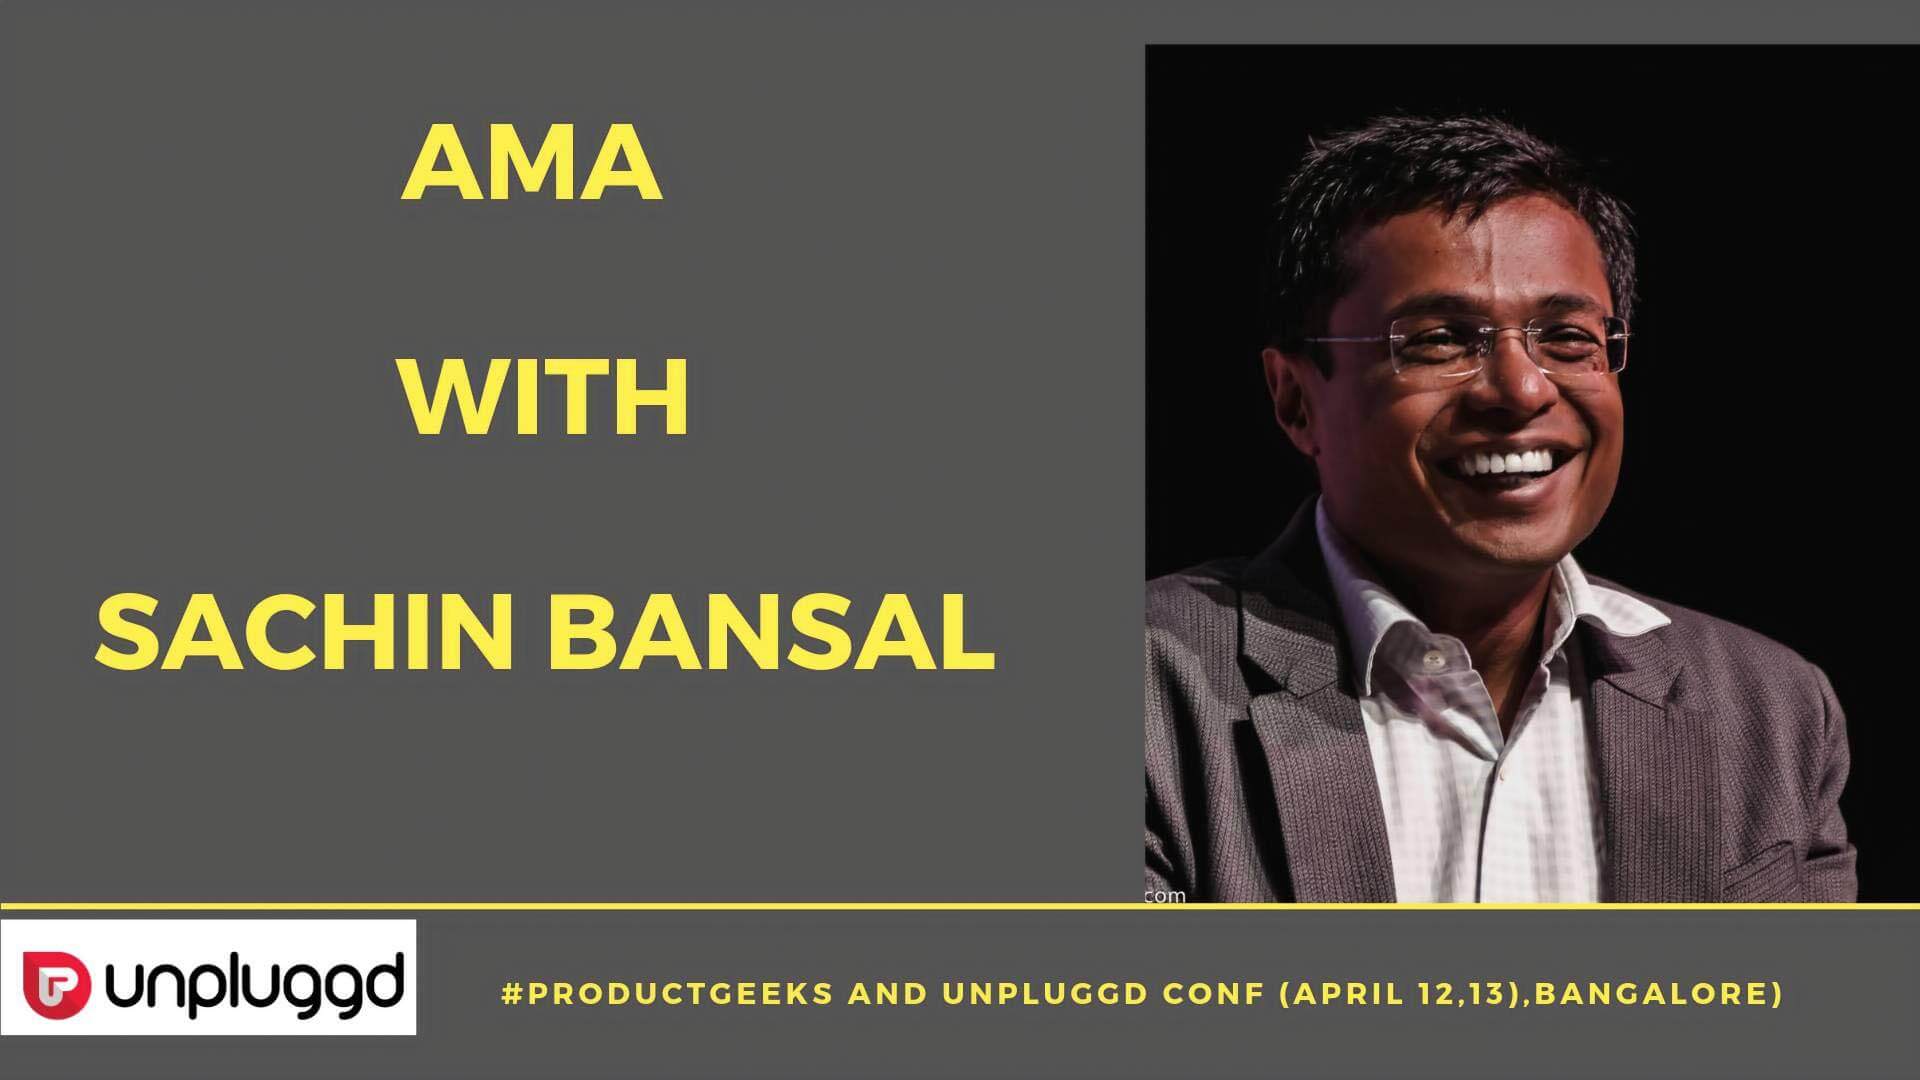 How to Meet Sachin Bansal In Person